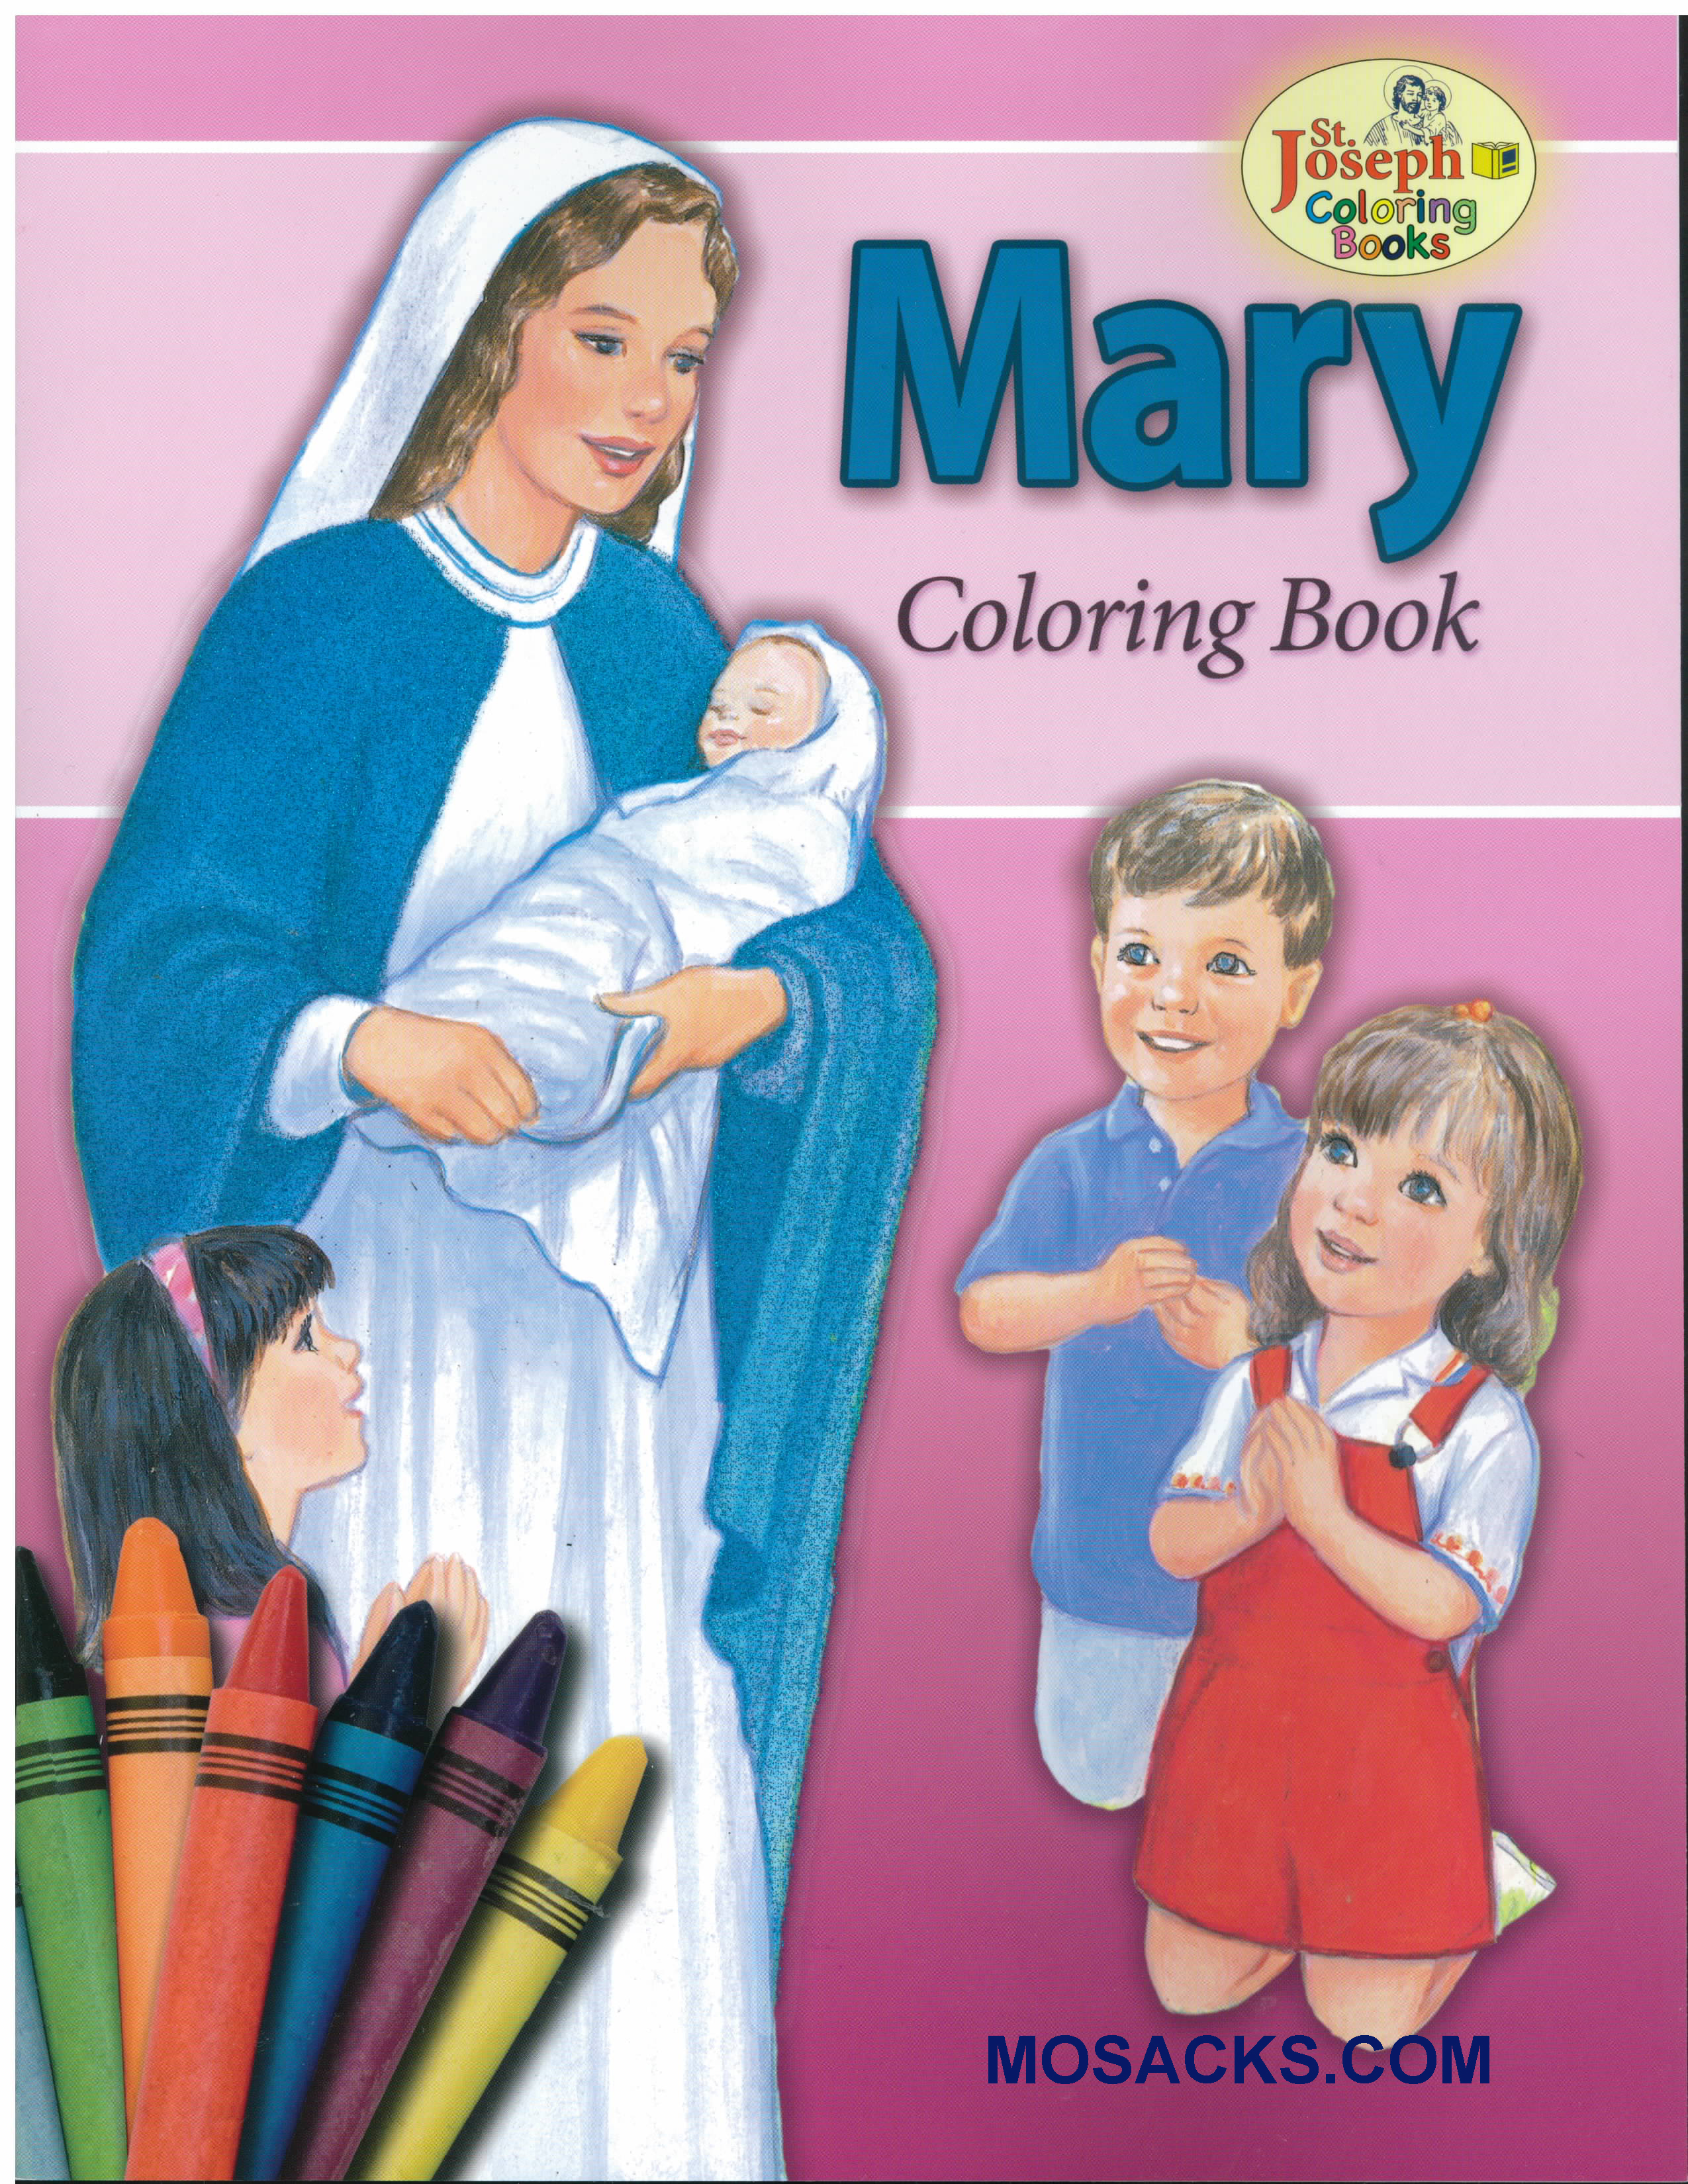 St Joseph Educational Coloring Book Mary-978089942685-3